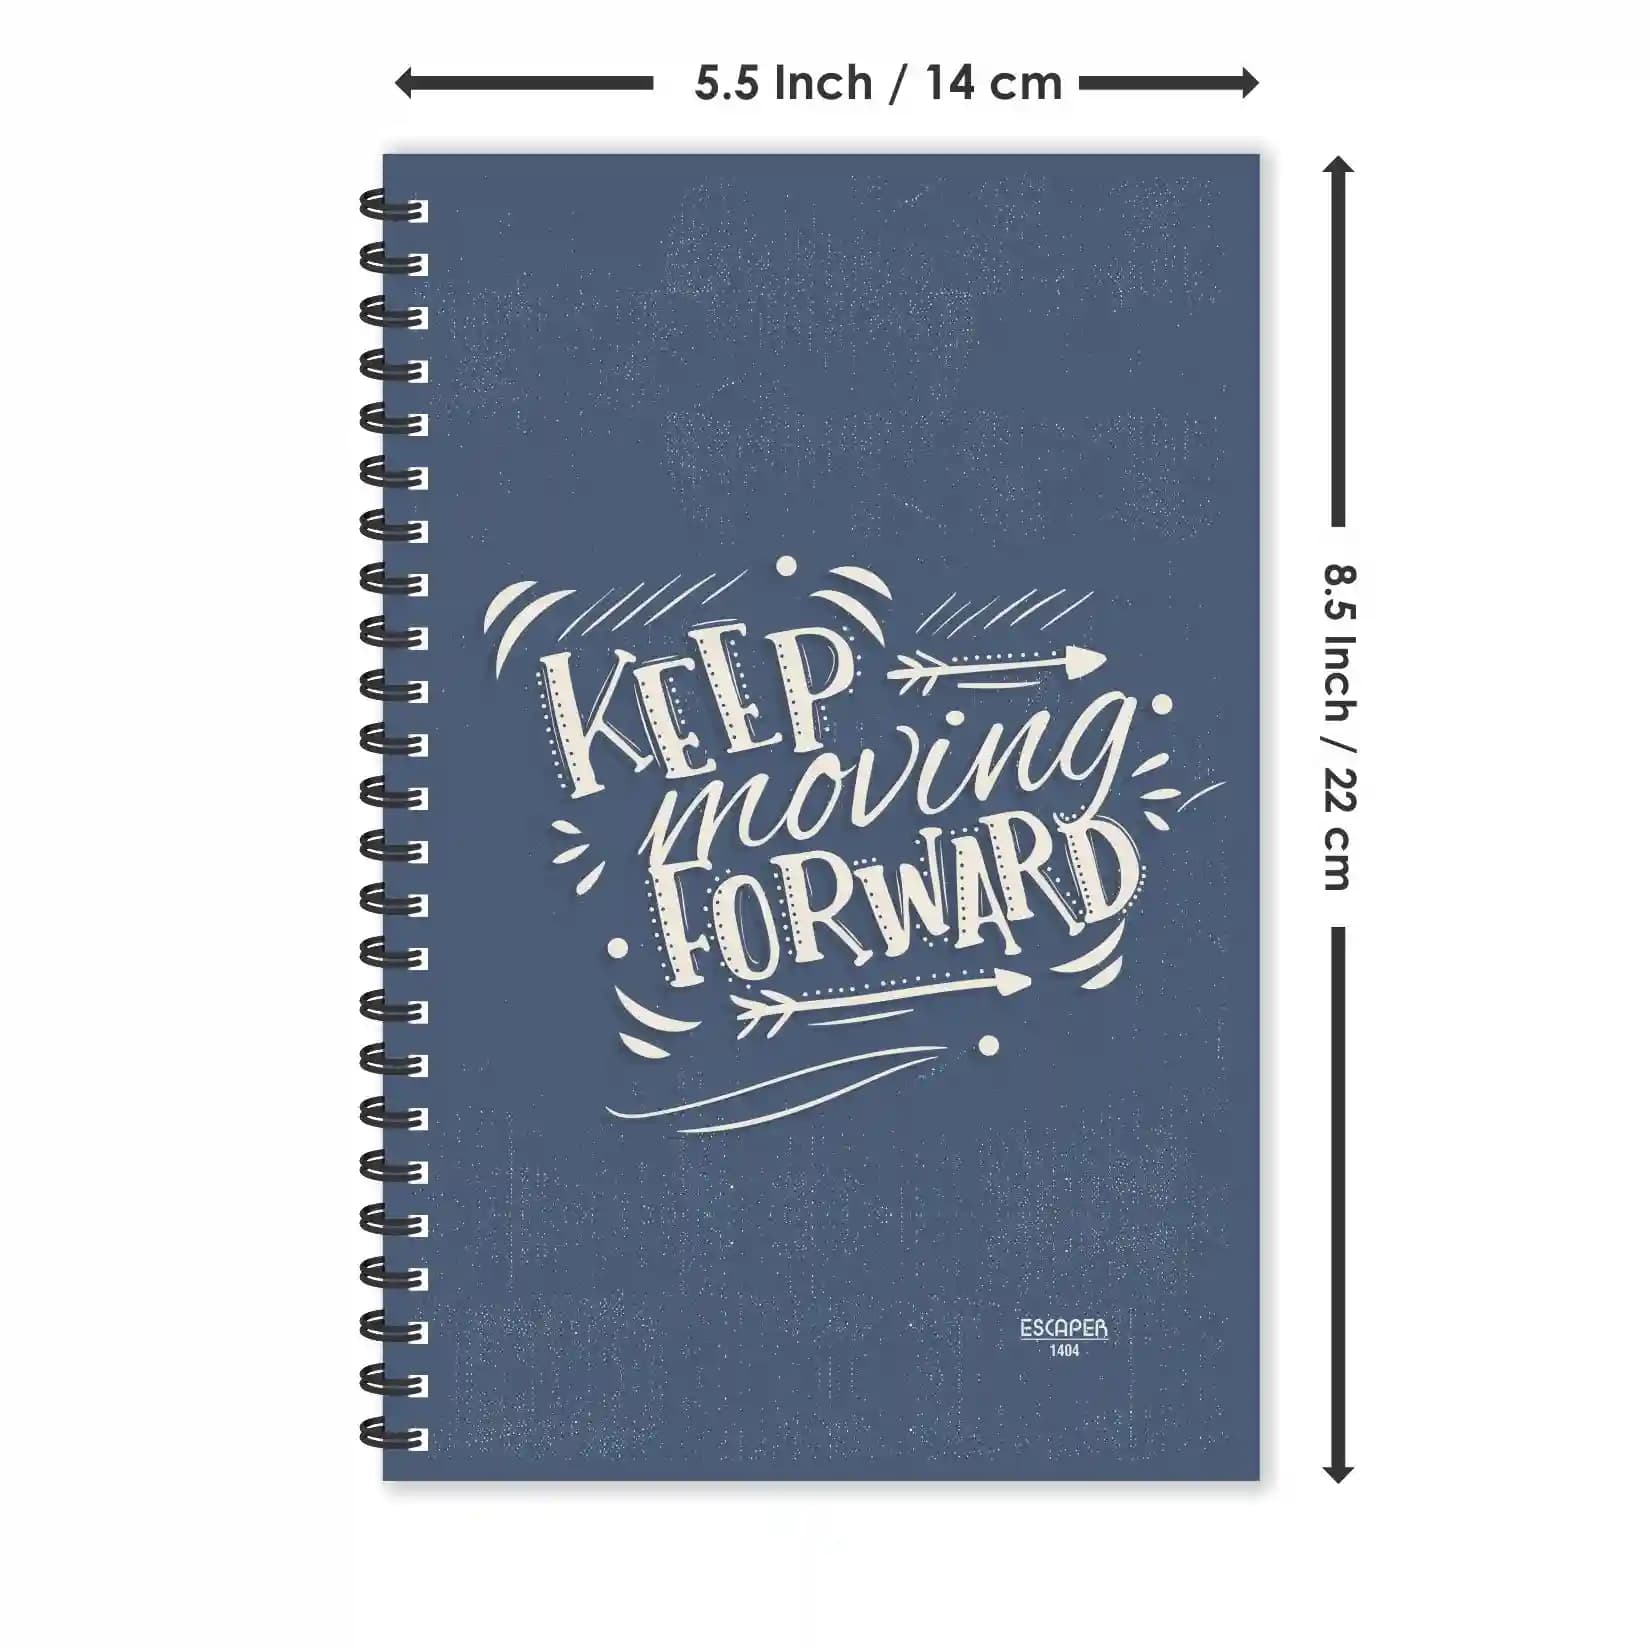 Keep Moving Forward Motivation Ruled Diaries - Pack Of 3